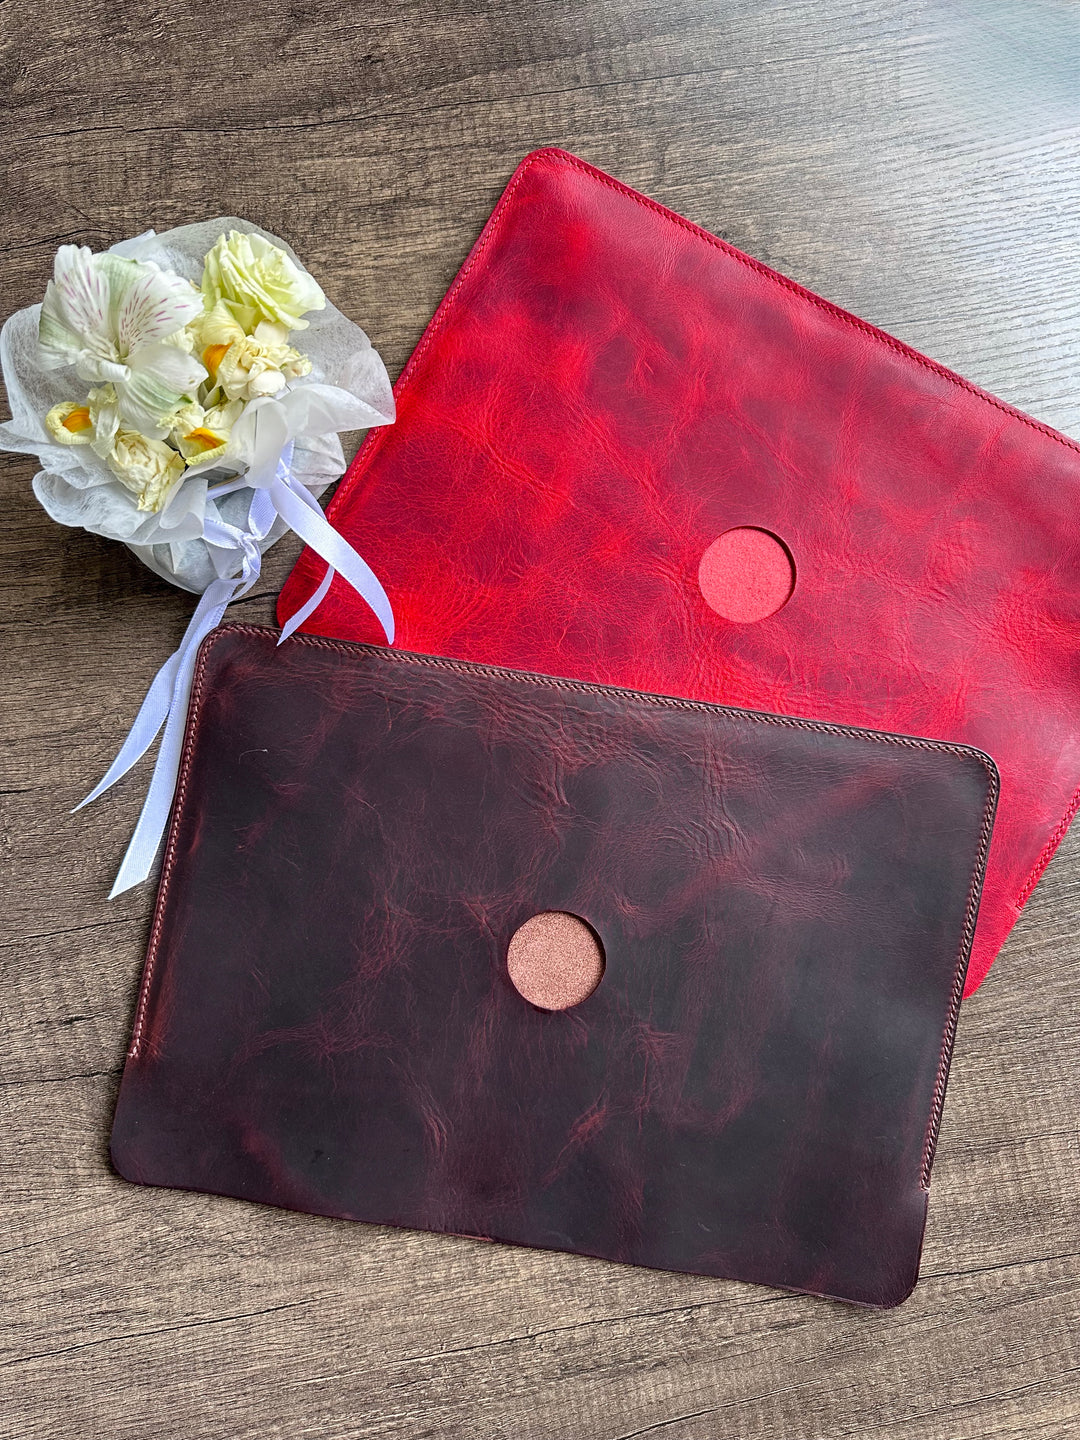 MacBook Case "wax pull up Red"